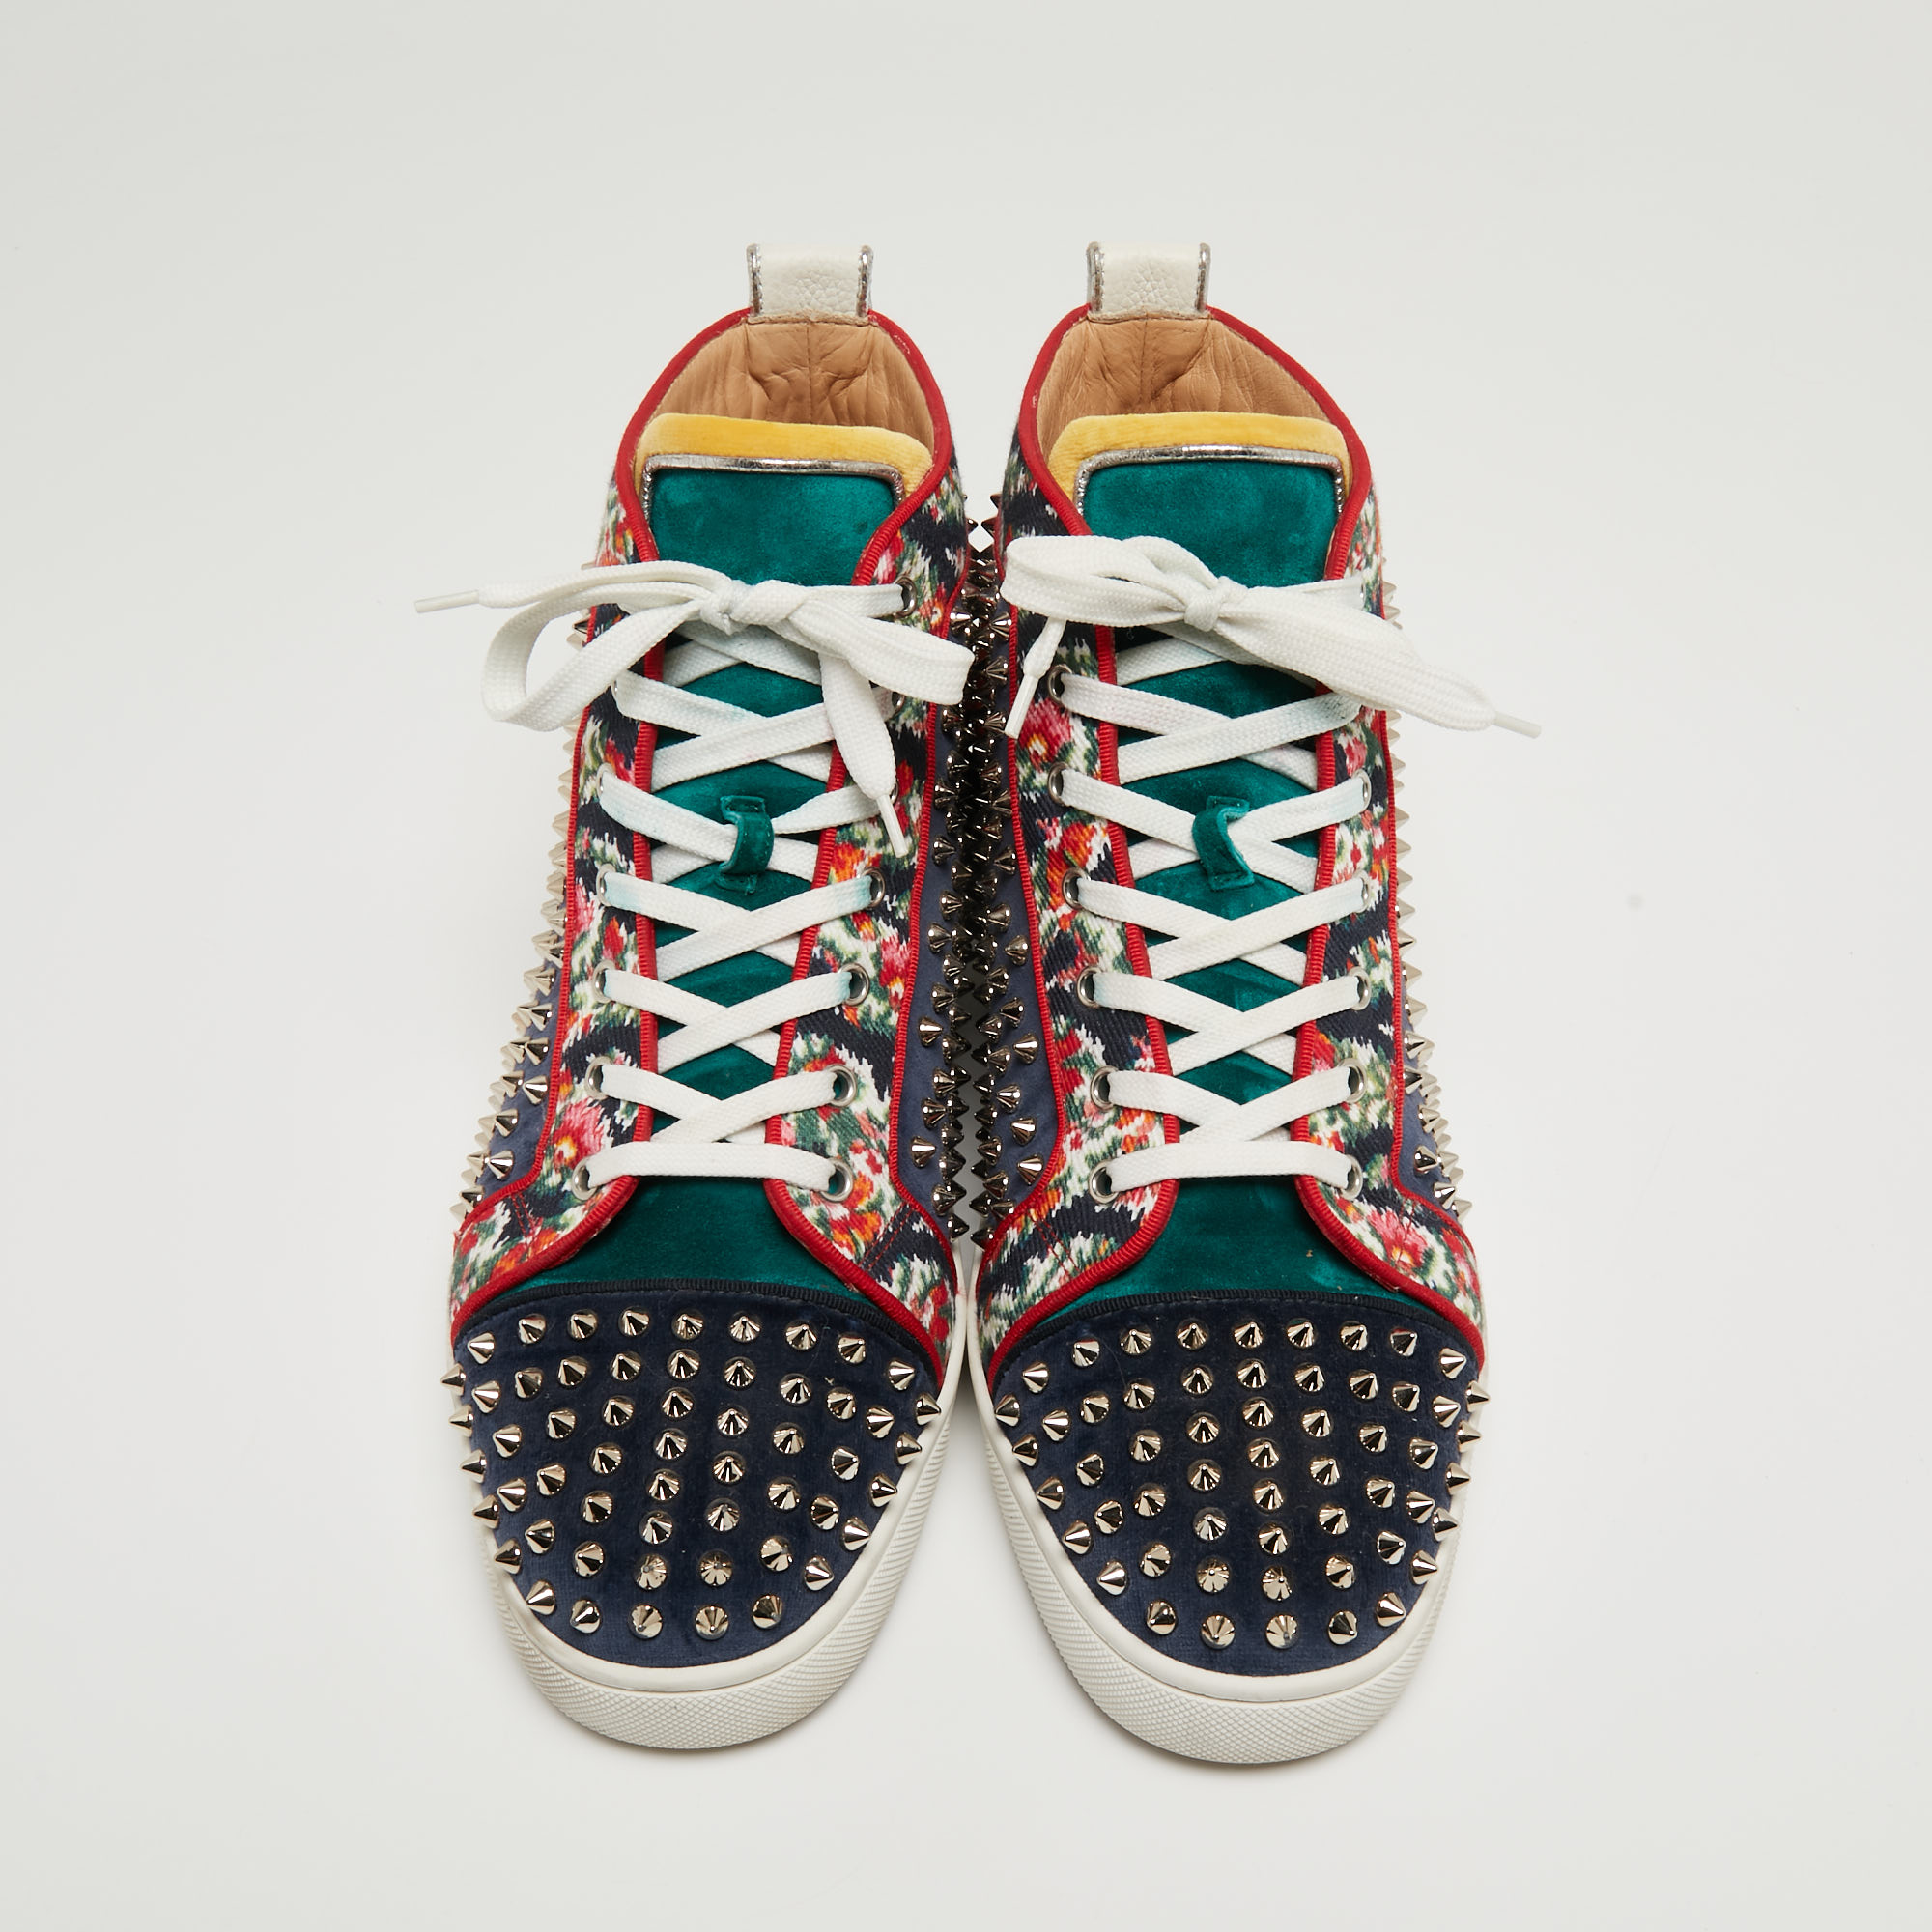 Christian Louboutin Tricolor Leather And Fabric Louis Spikes High-Top Sneakers Size 44.5